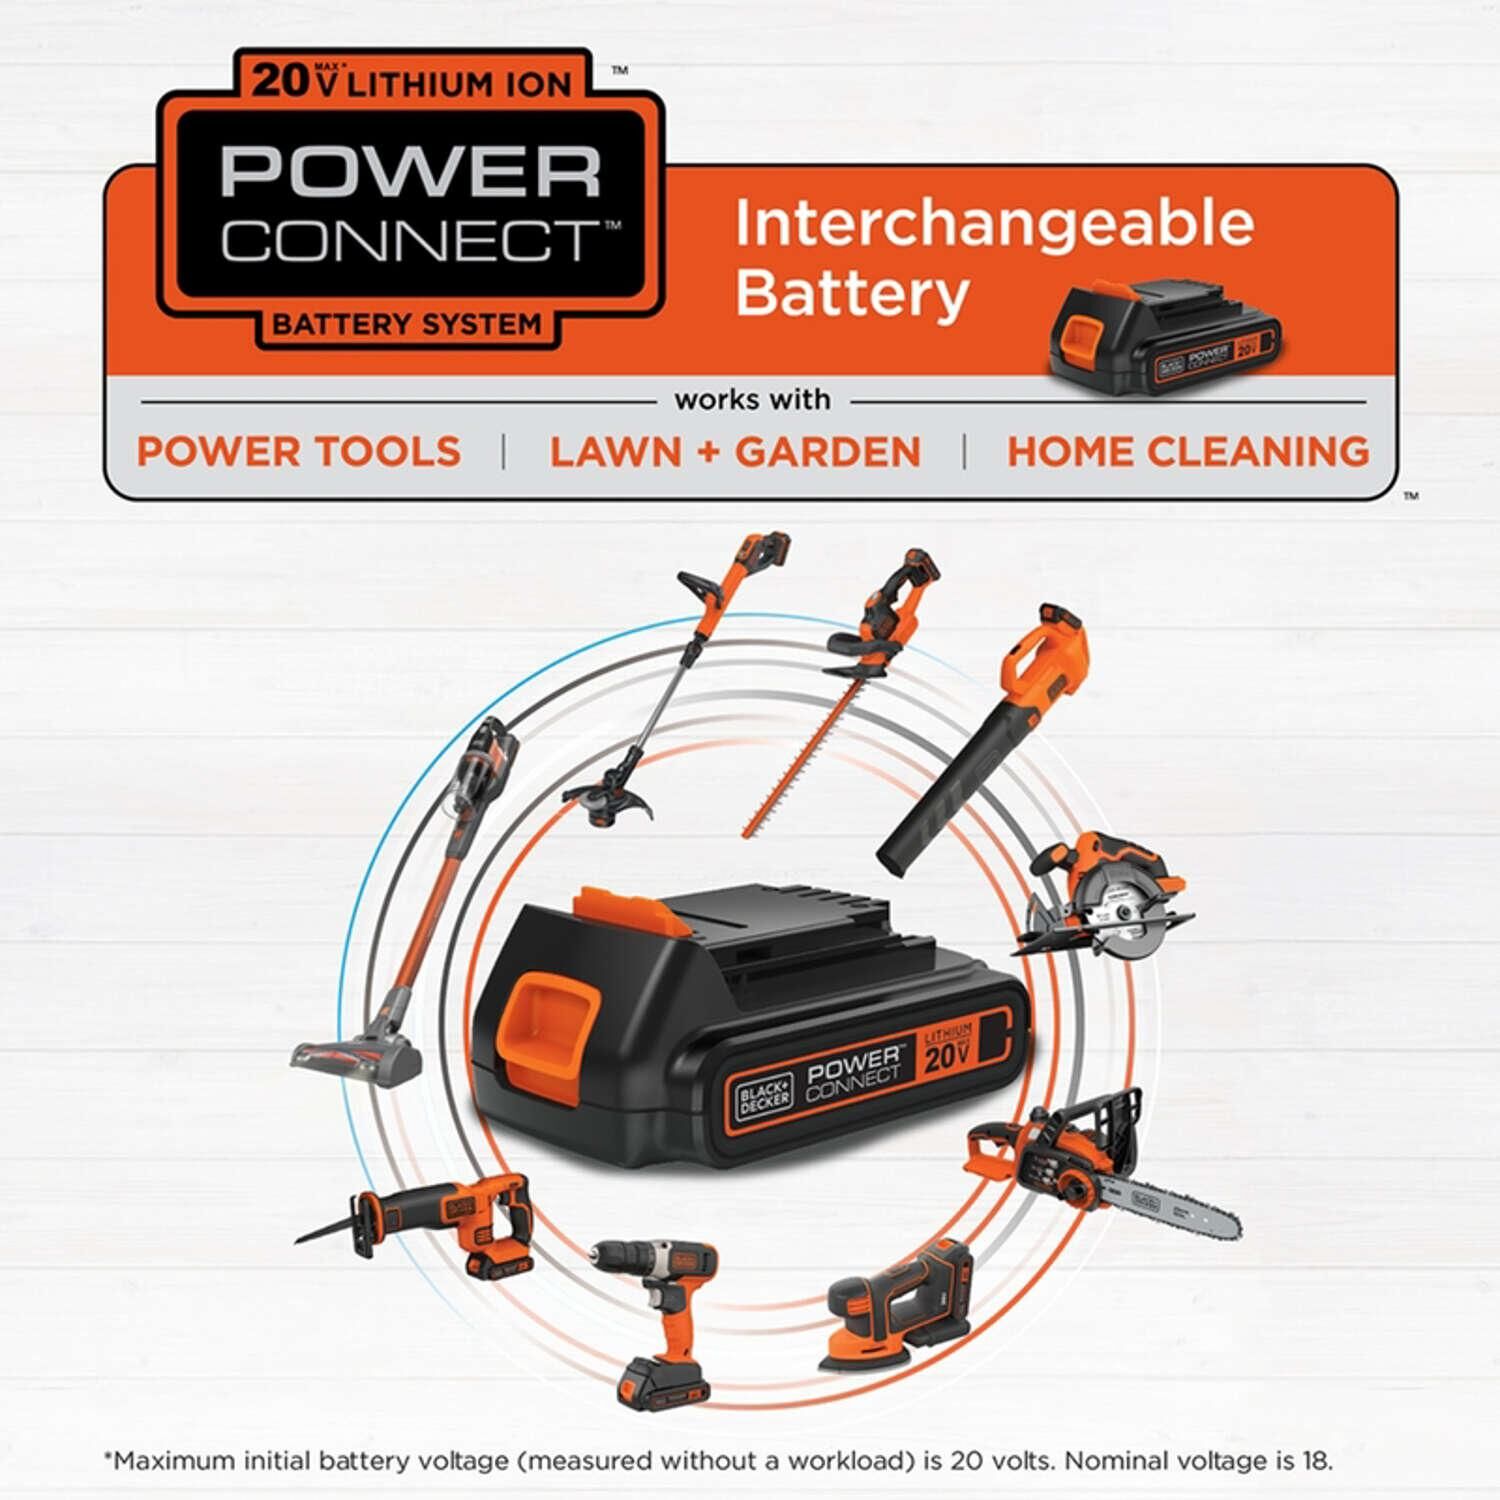 BLACK+DECKER 20 volt max Powerconnect tools organized in a circle around a Black and decker 20 volt Powerconnect lithium battery